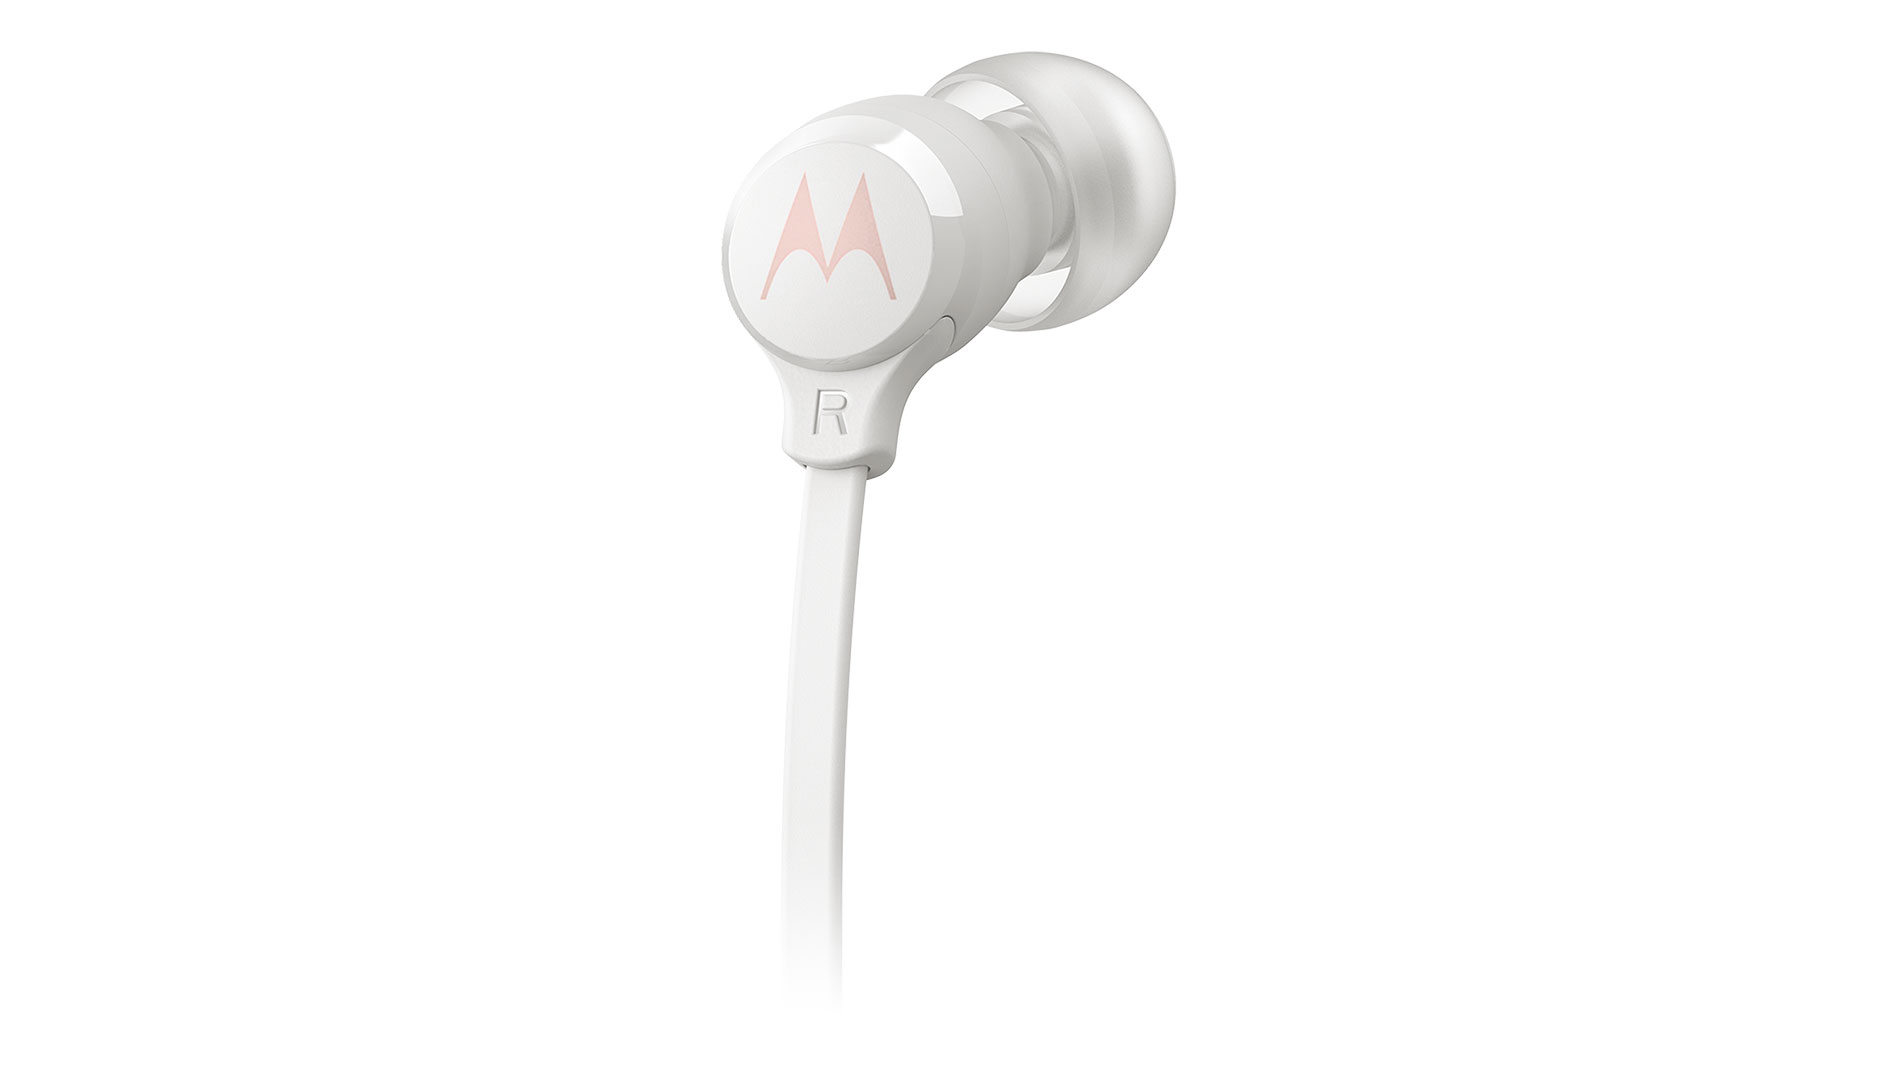 In-ear headphones Earbuds 3C-S in white - product image